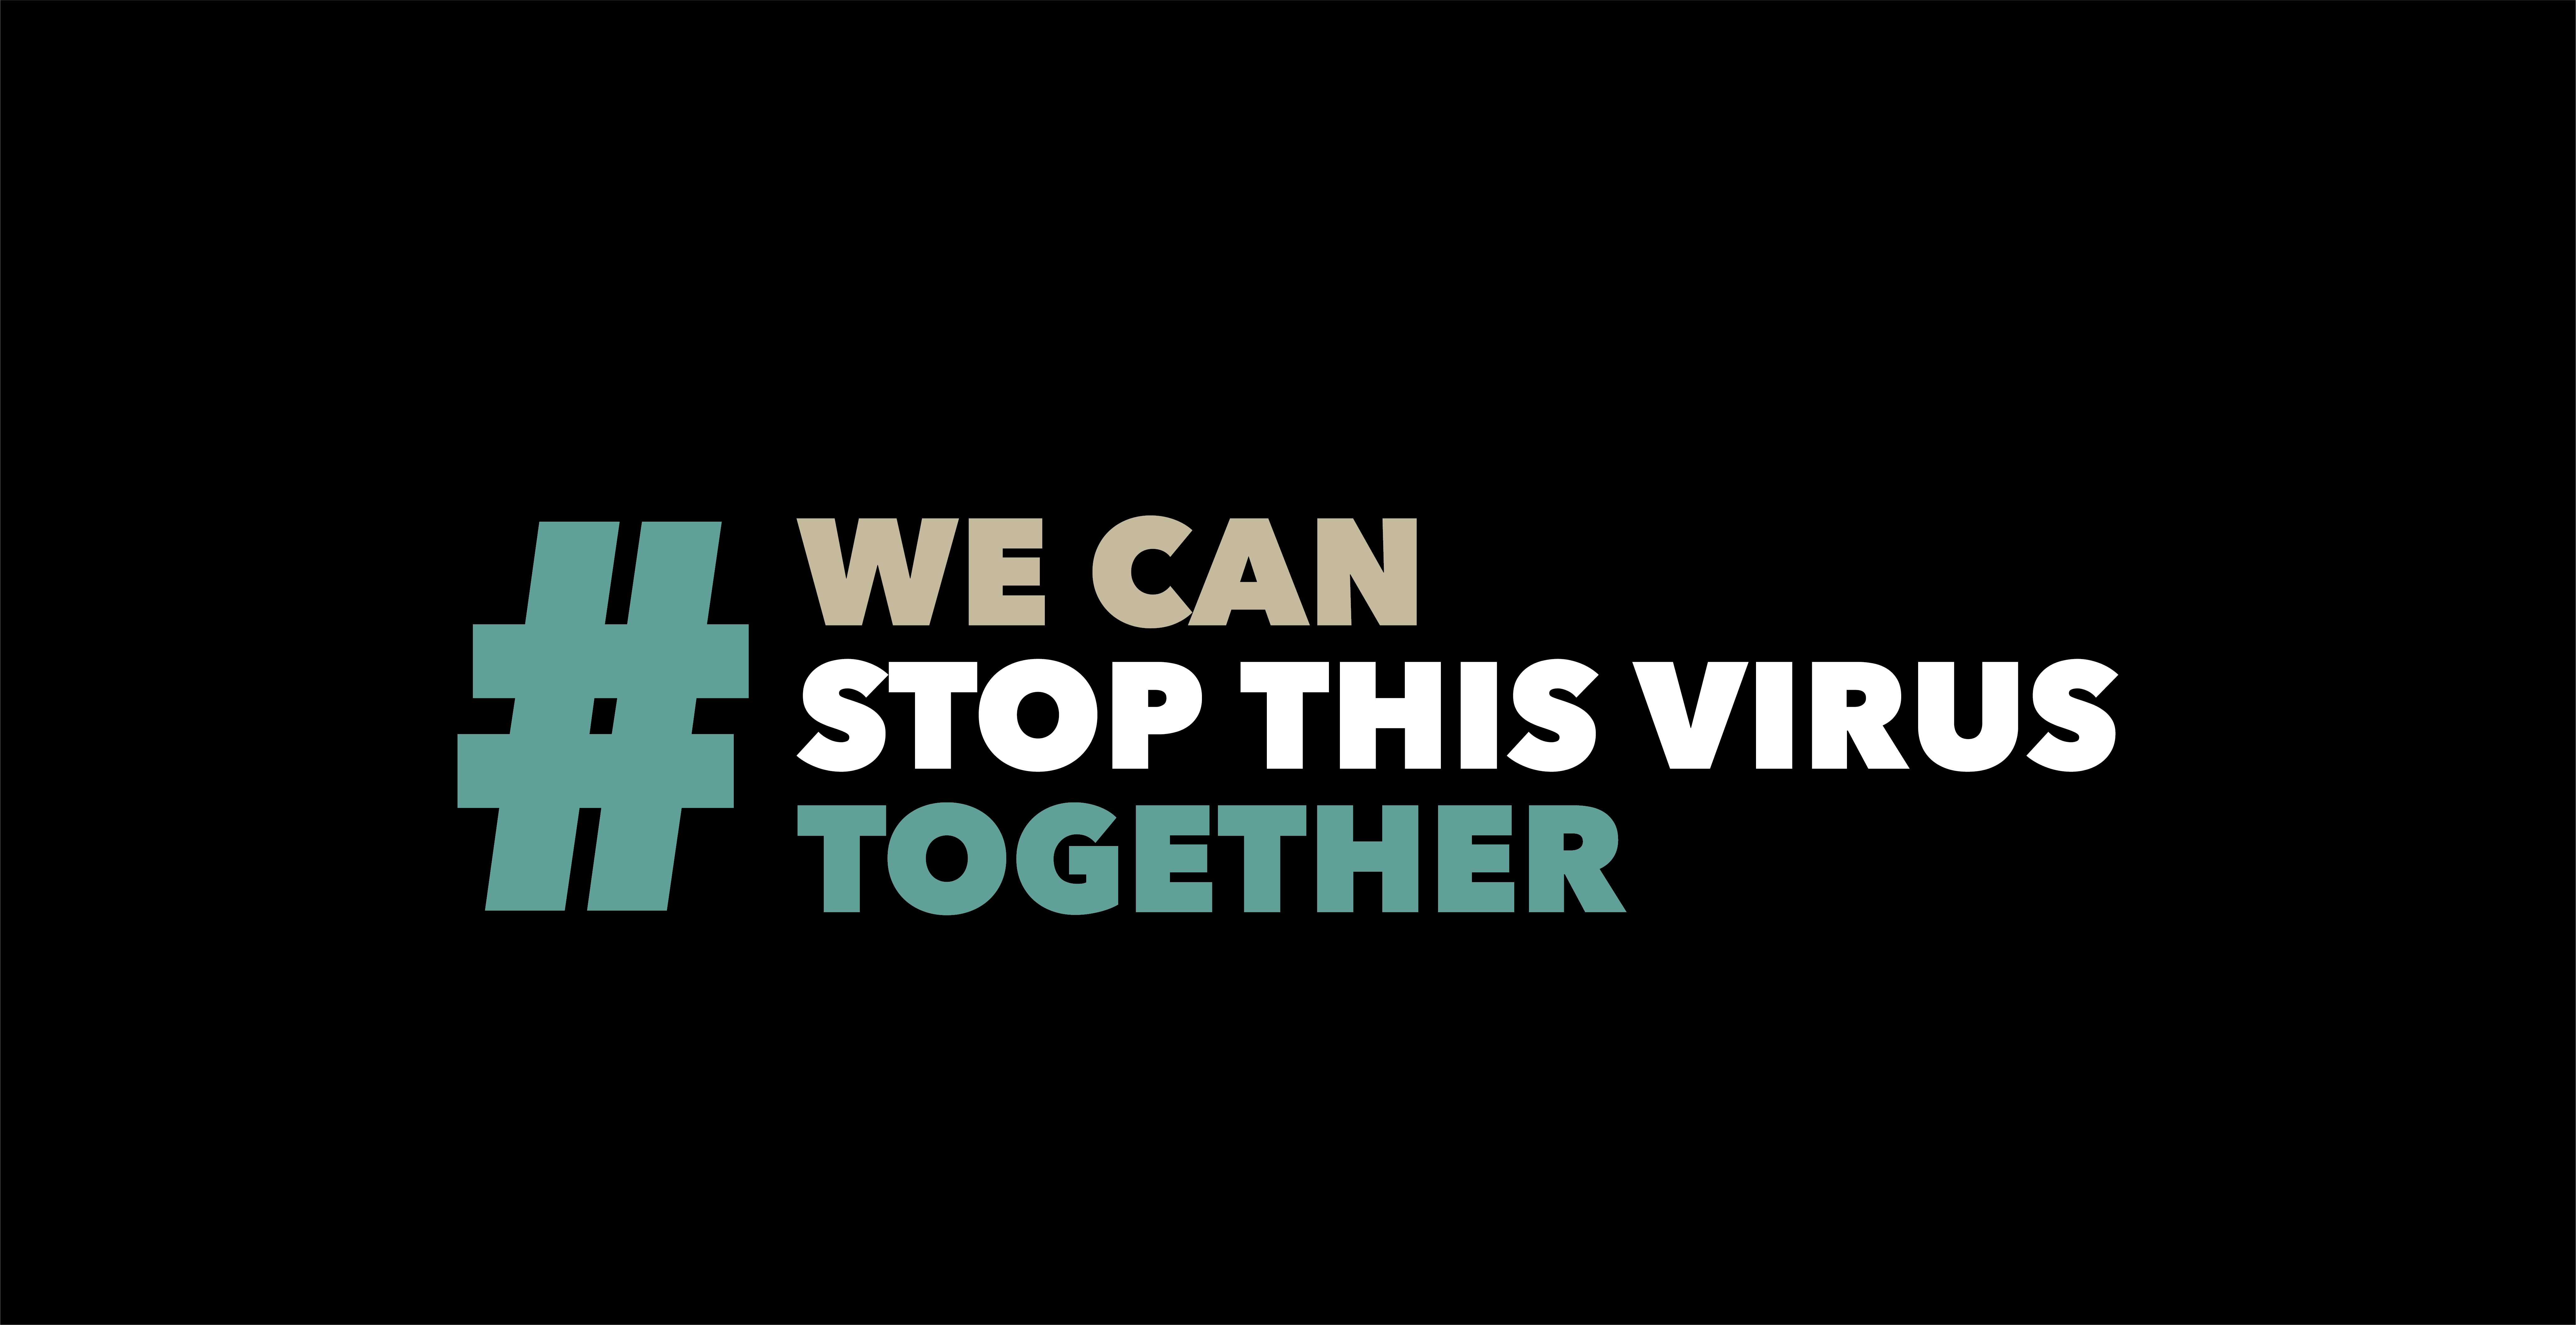 WE CAN STOP THIS VIRUS TOGETHER